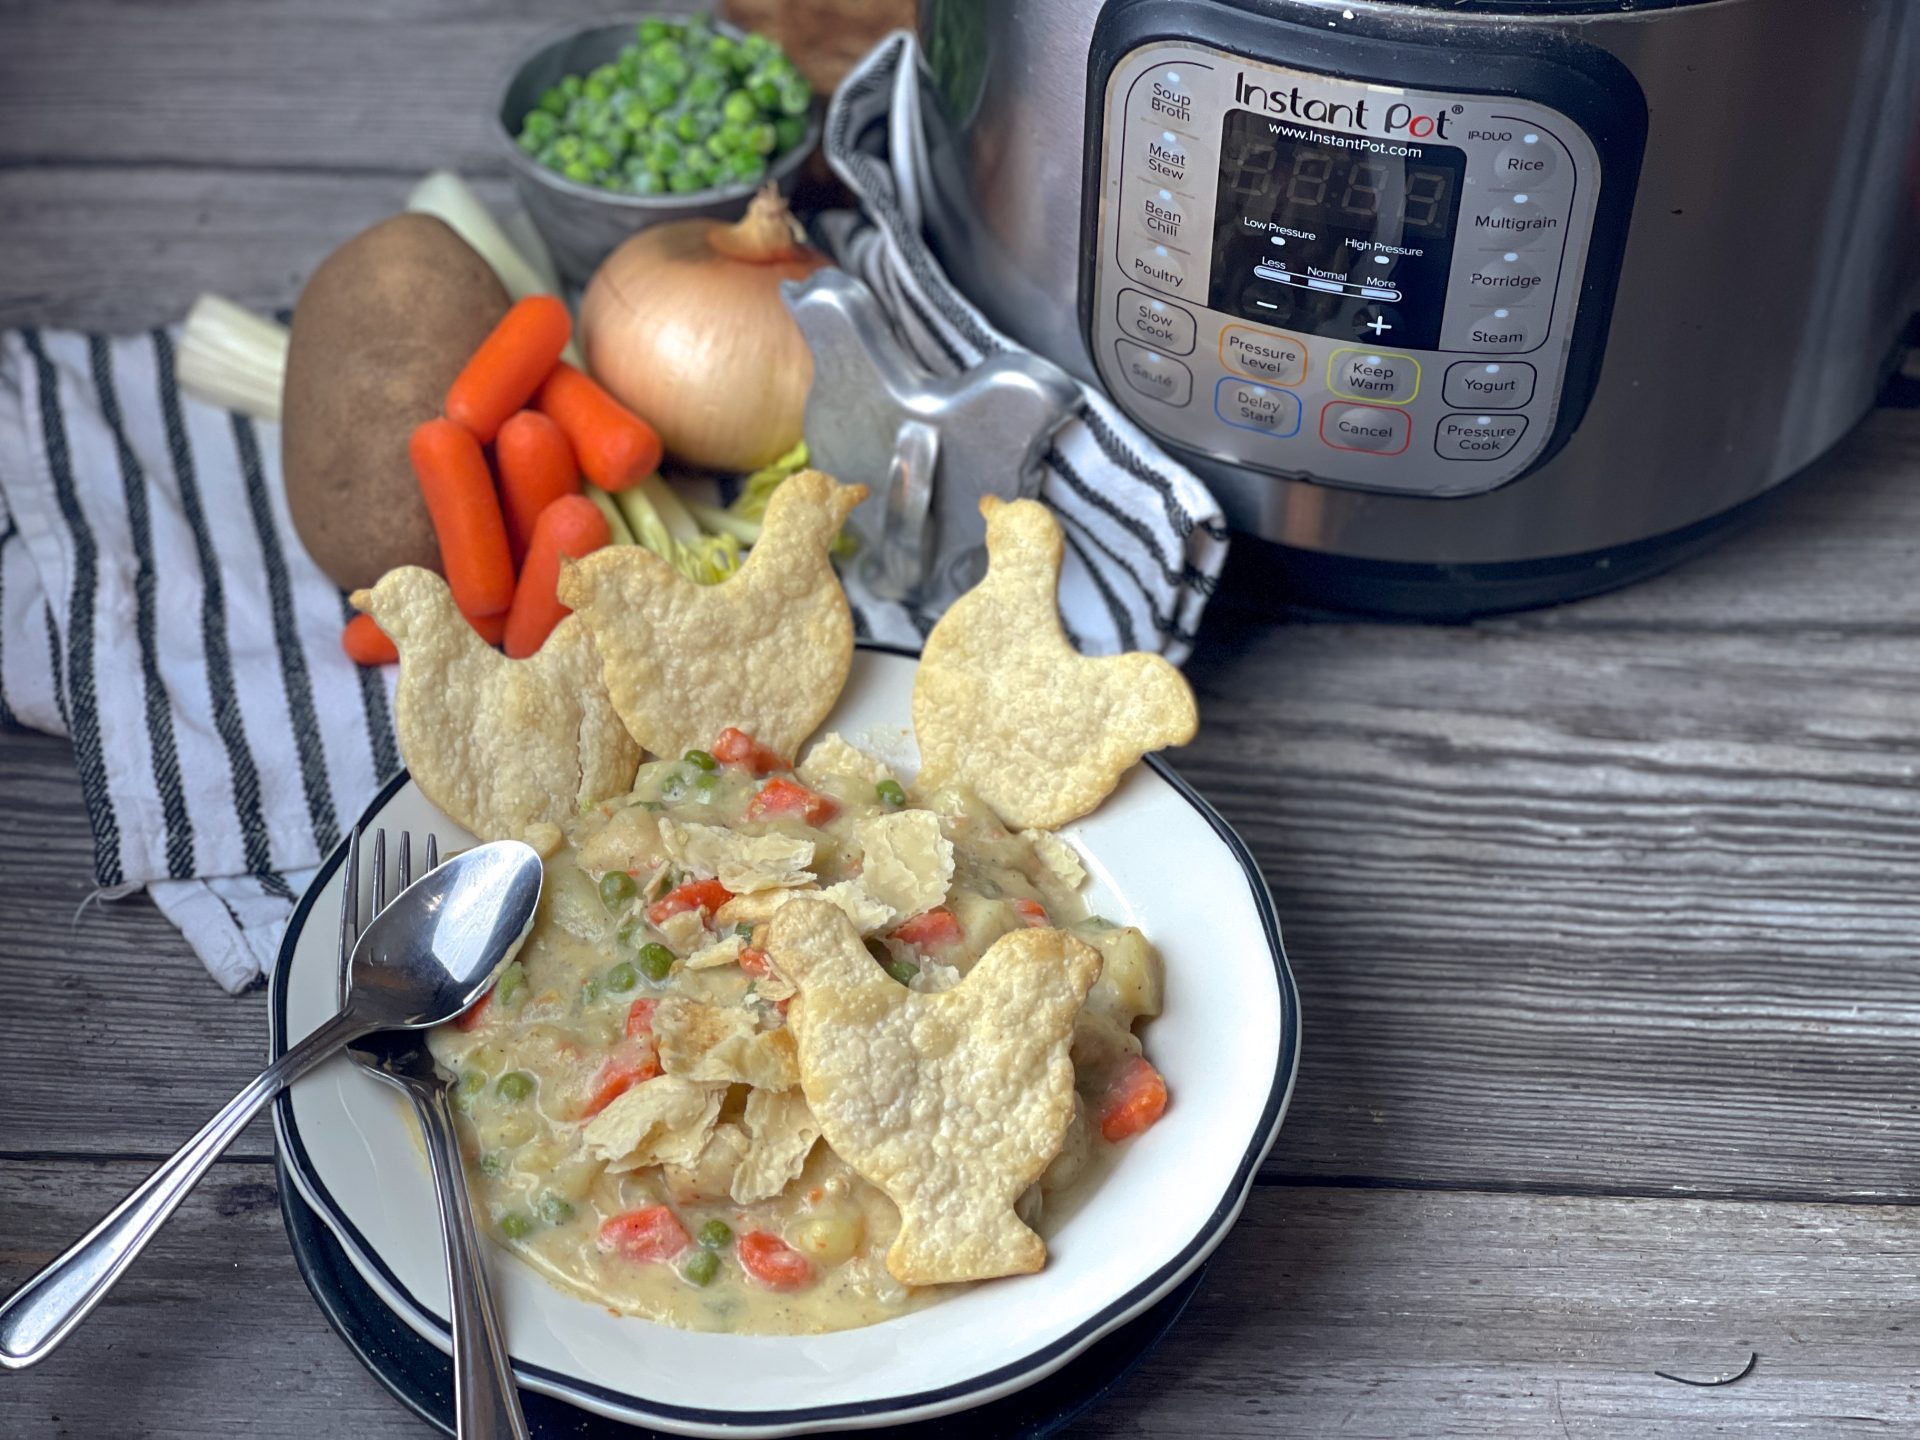 Instant Pot Chicken Pot Pie from Farmwife Feeds. A comfort food dish that takes less time than traditional but just as delicious! #chicken #potpie #instantpot